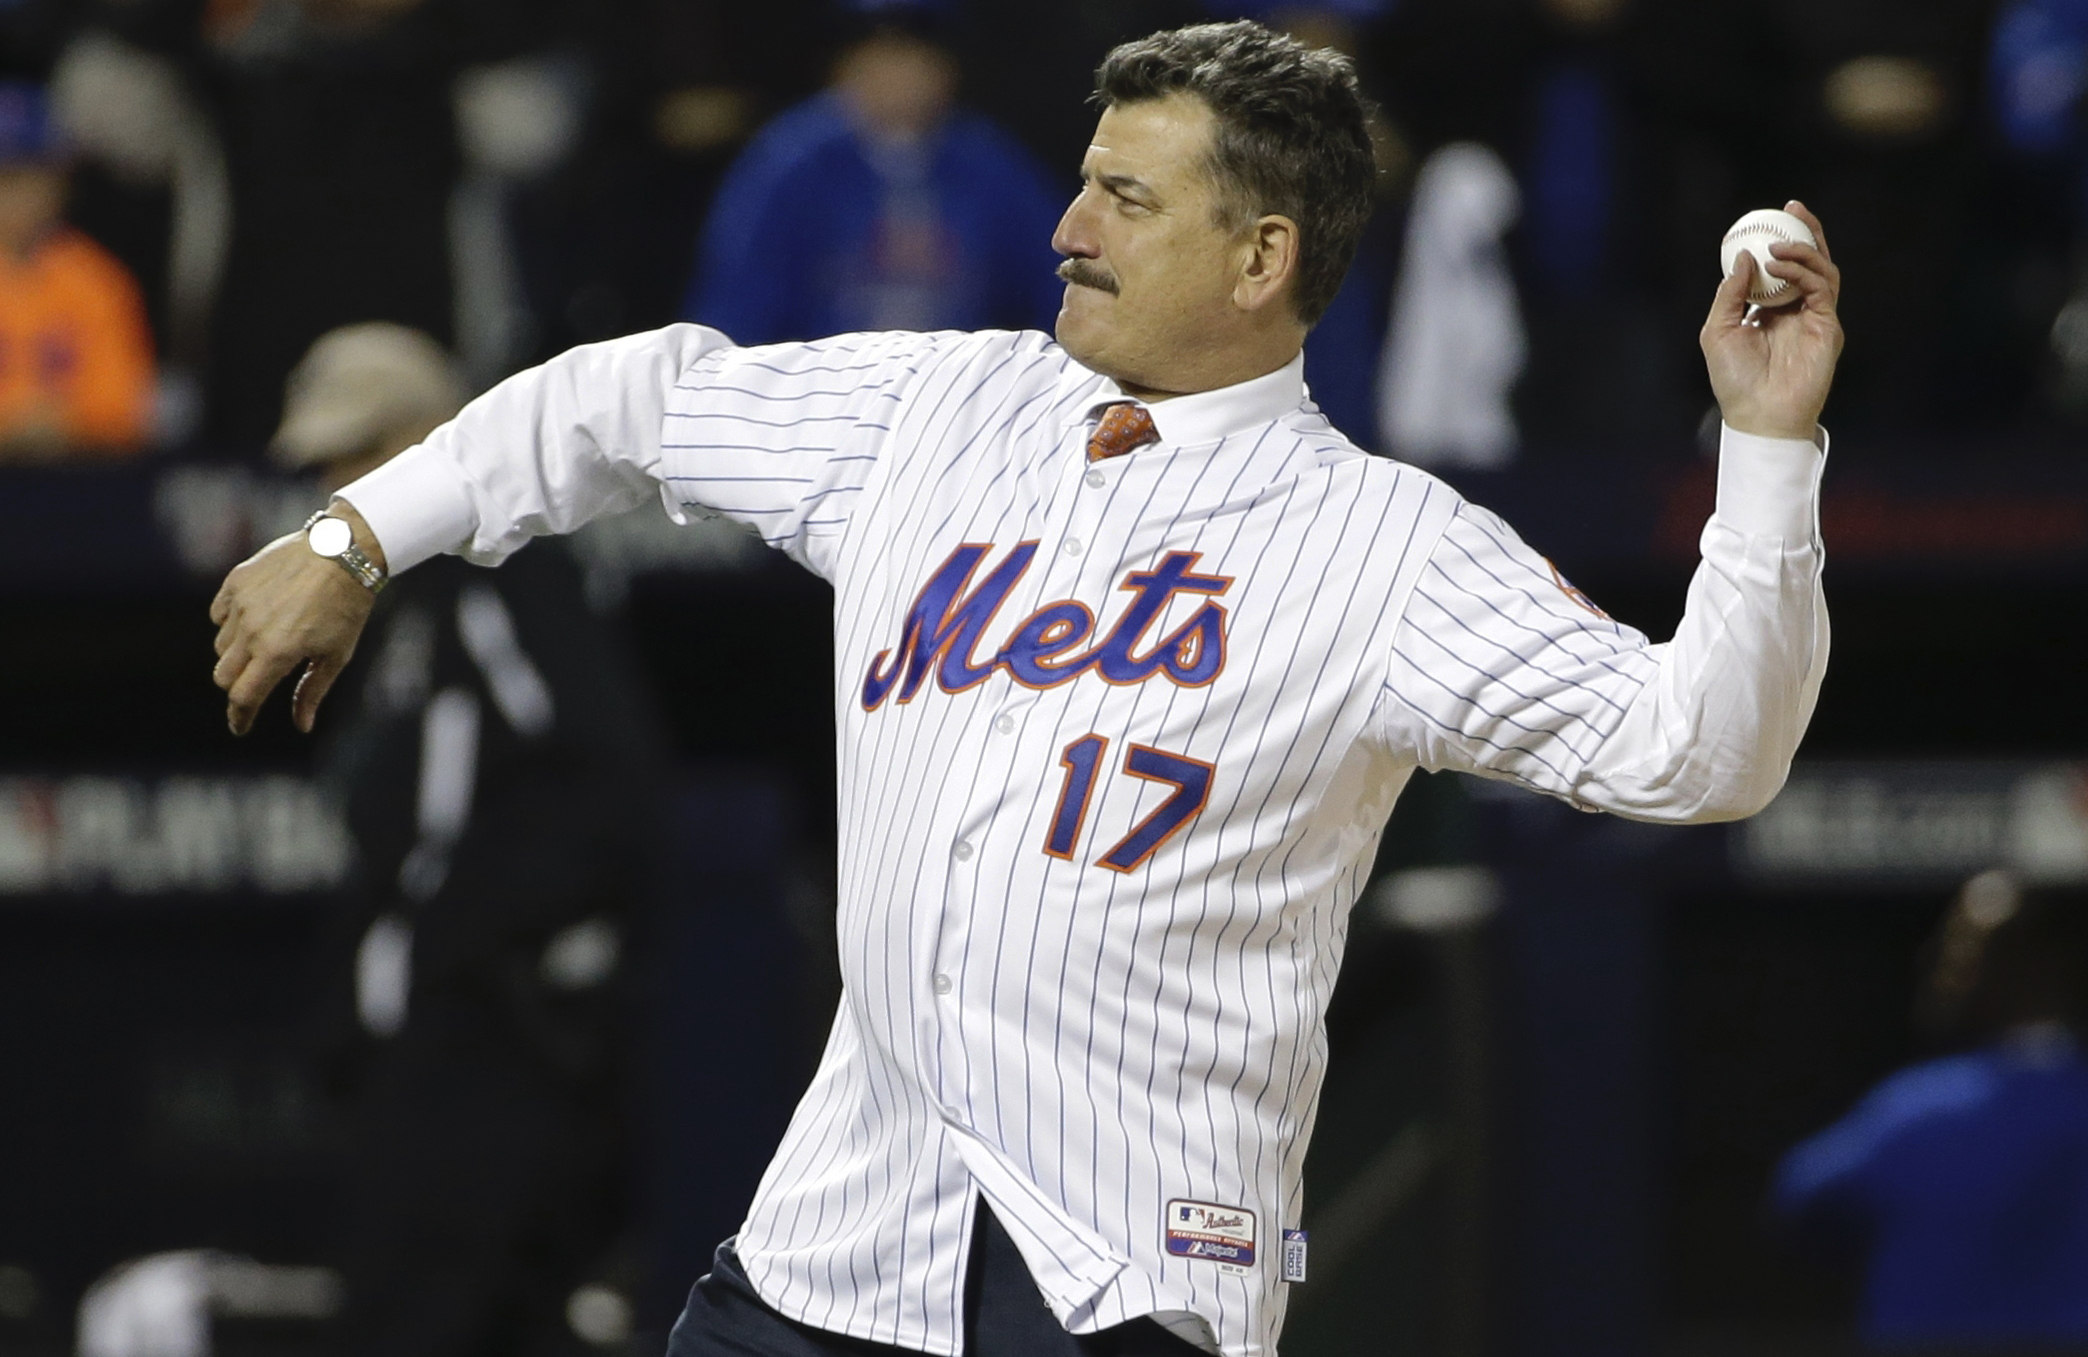 Keith Hernandez: Forgot shirt for Mets game, savagely roasted himself